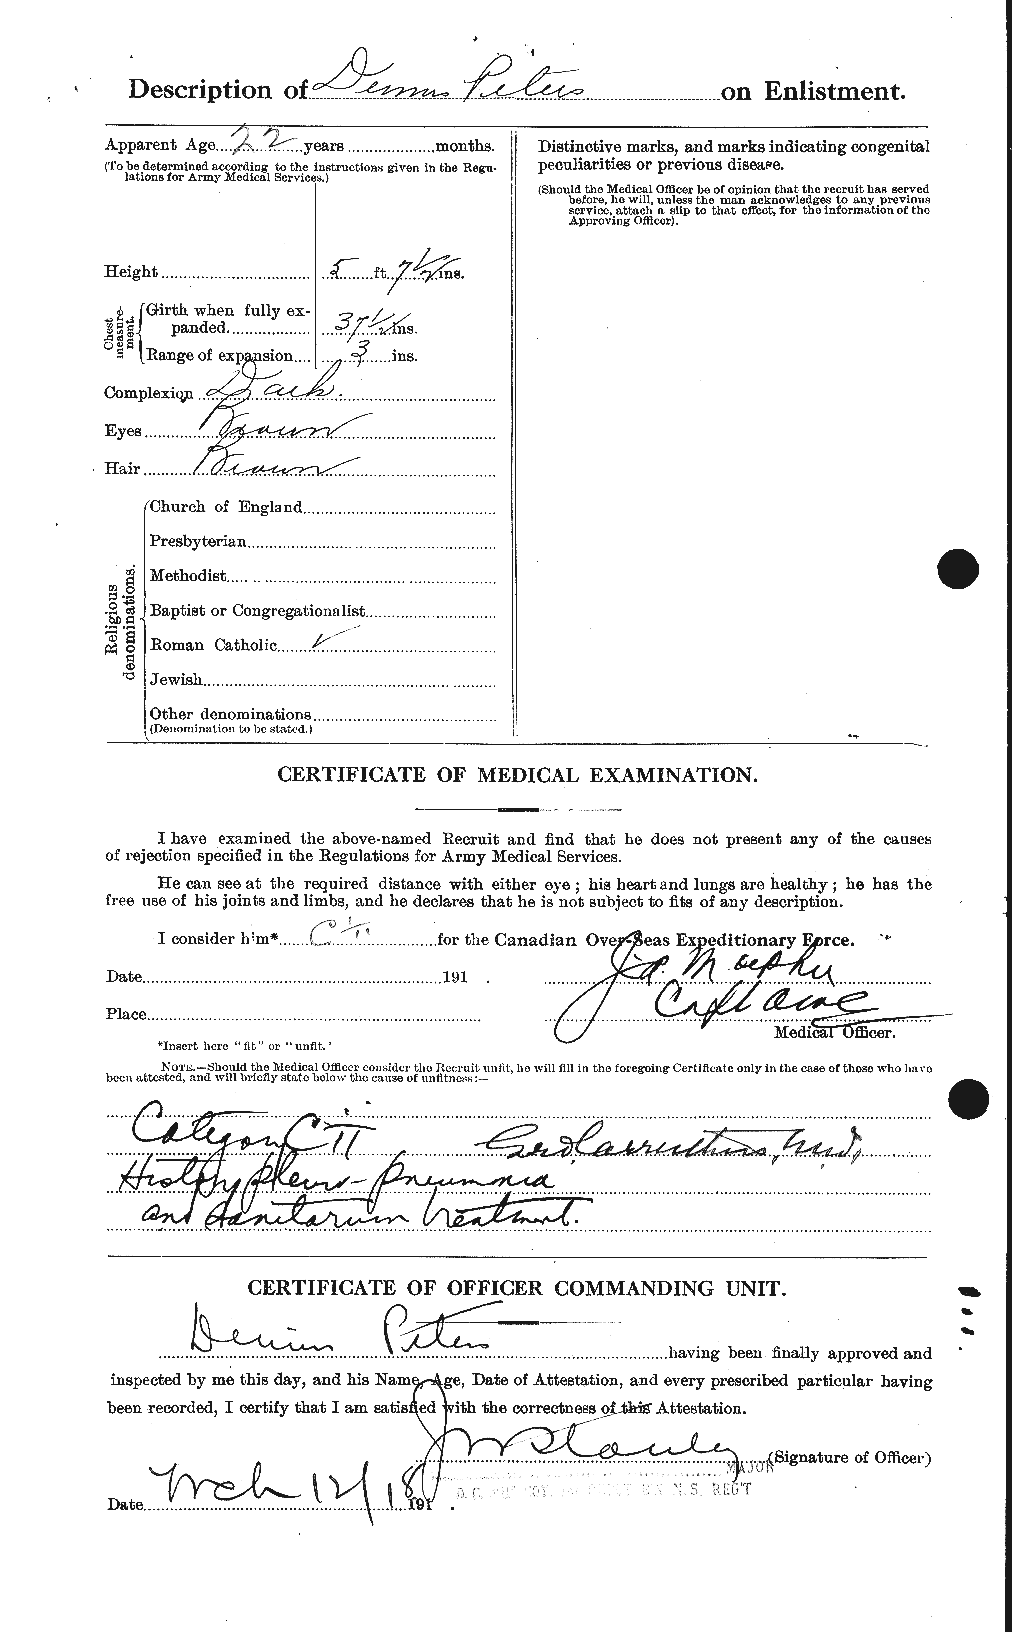 Personnel Records of the First World War - CEF 575394b